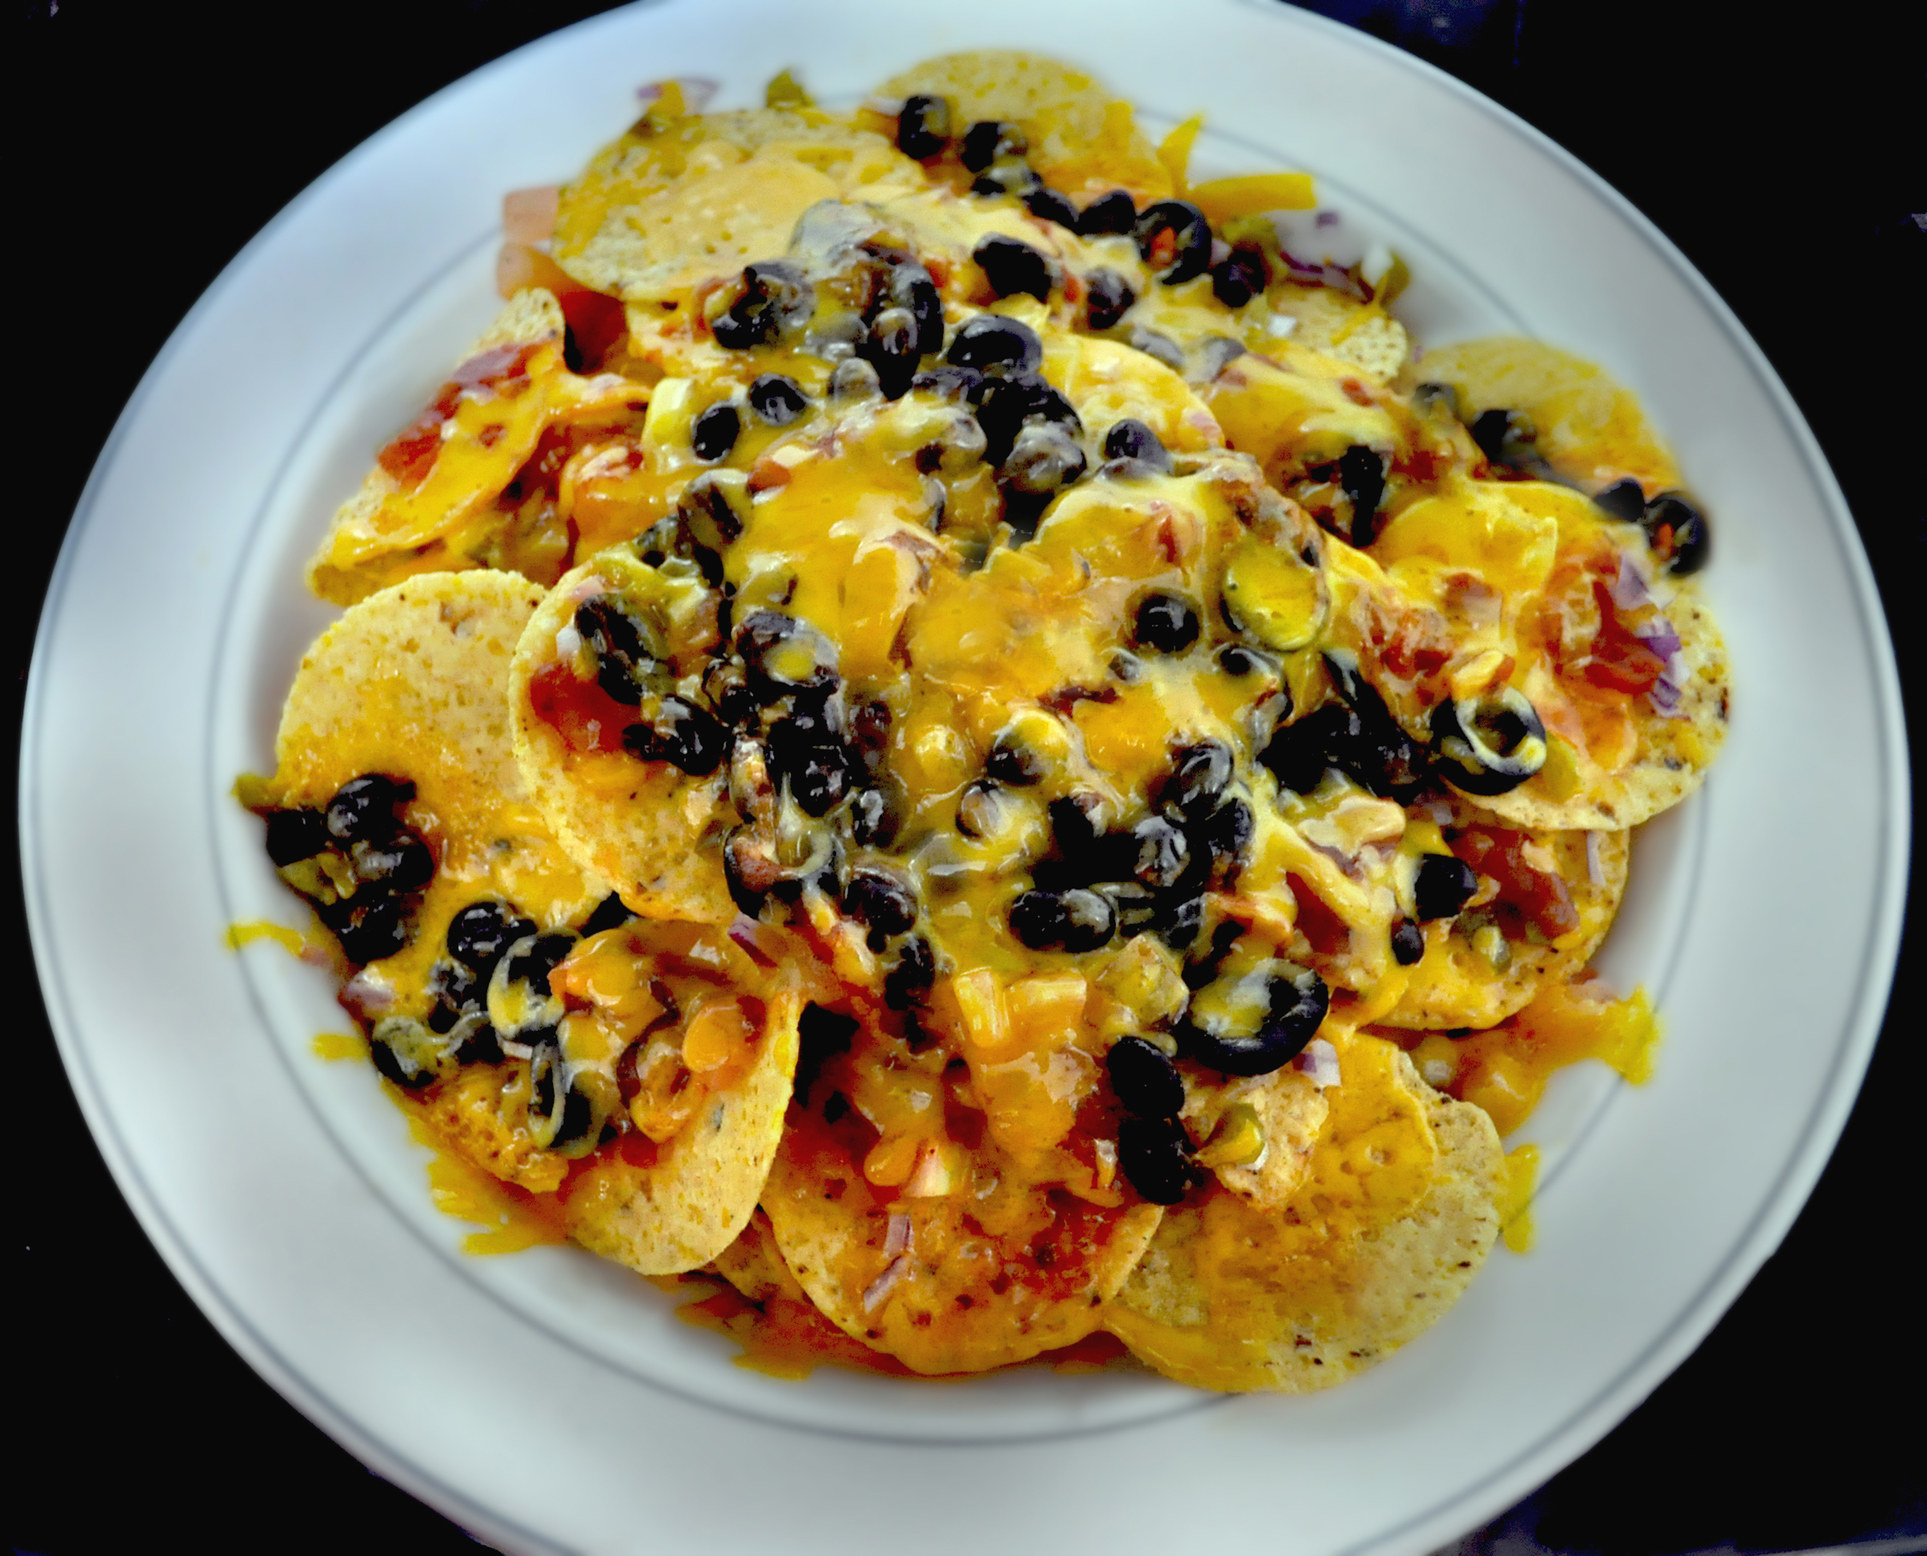 Nachos topped with black beans